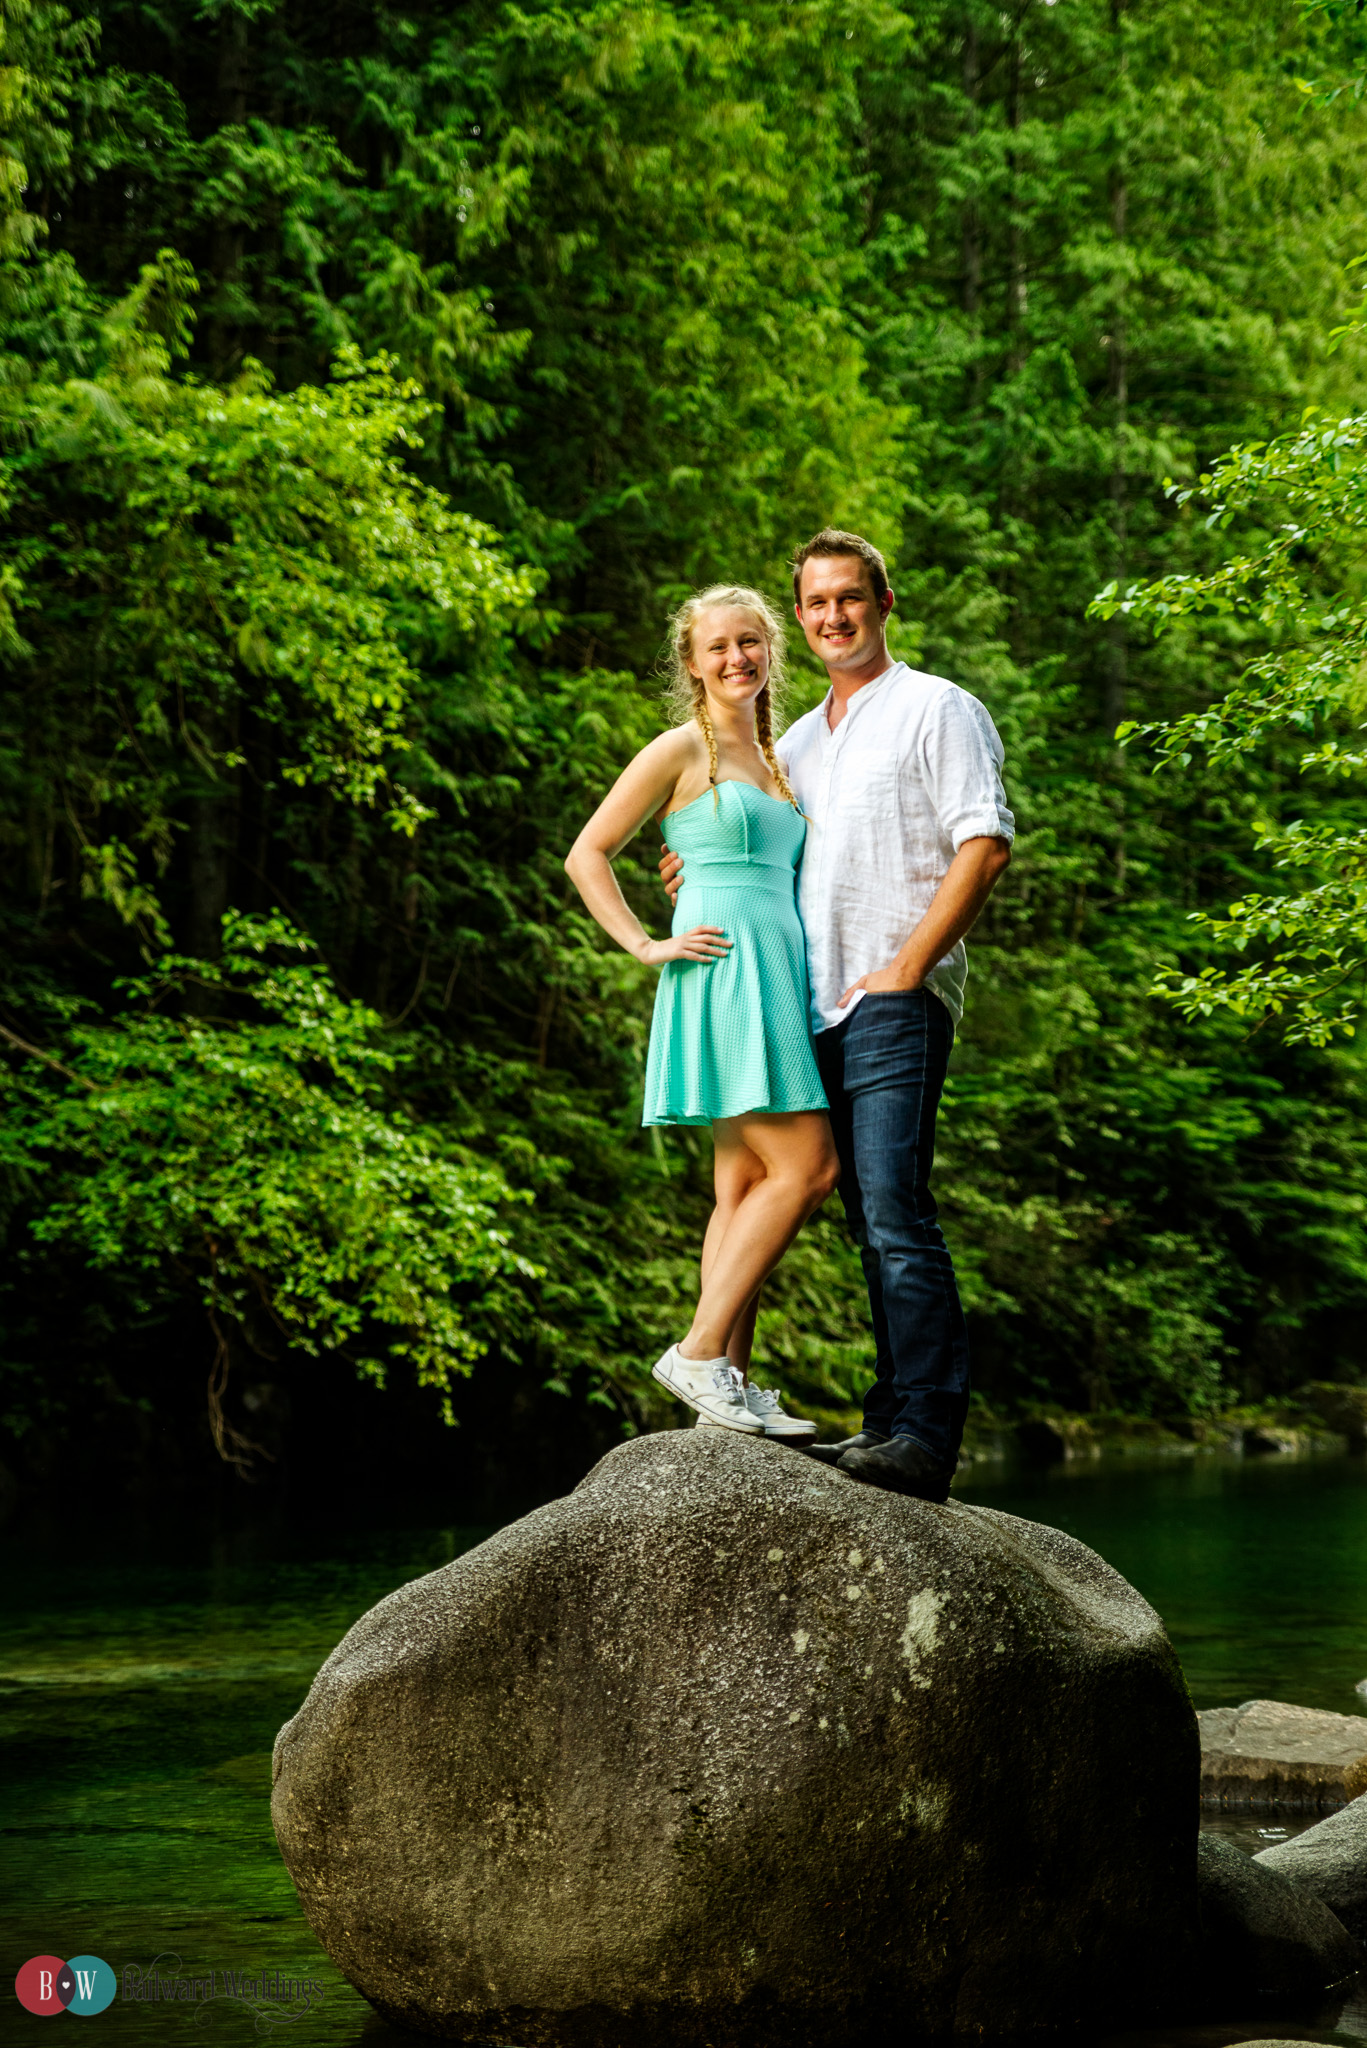 Jason and Marina Golden Ears Engagement Photography Session